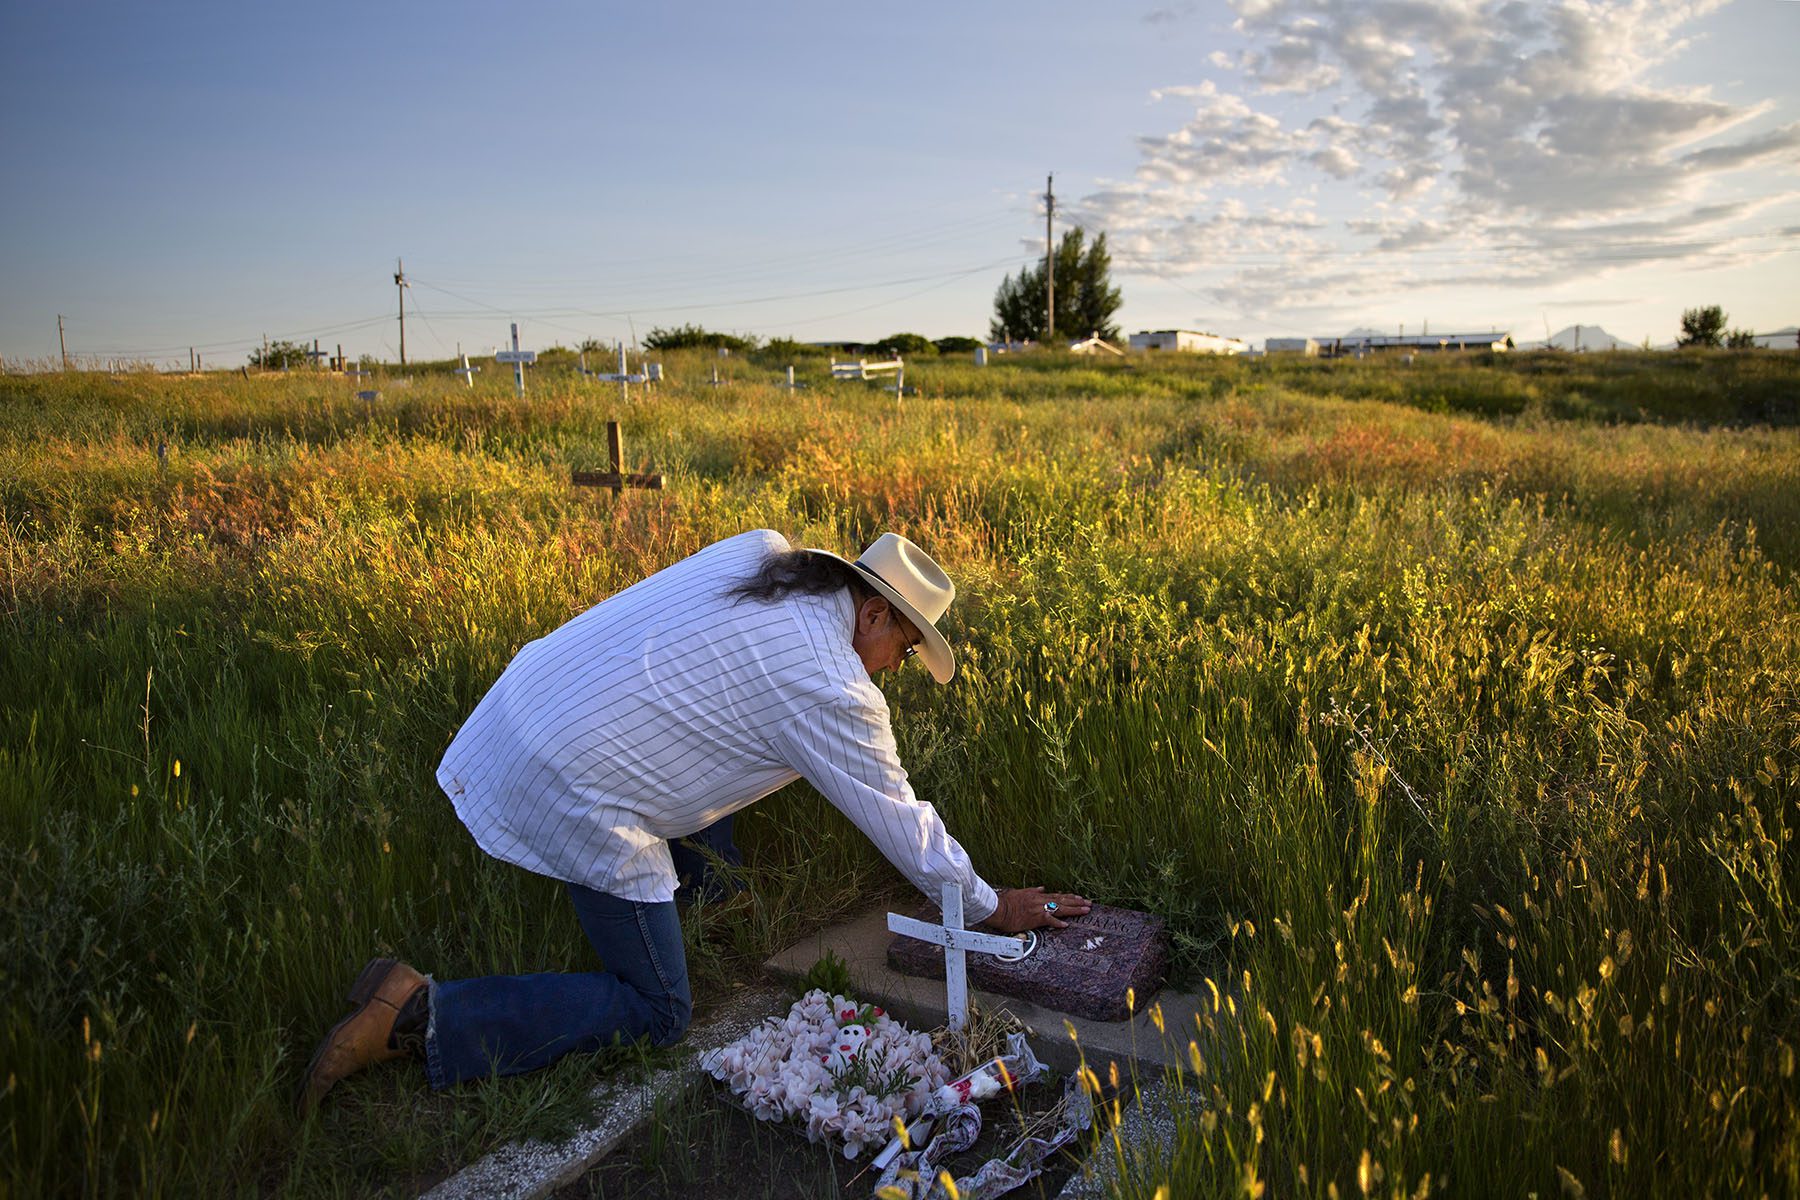 A man wearing a cowboy hat kneels to touch a tomstone in a field at golden hour.